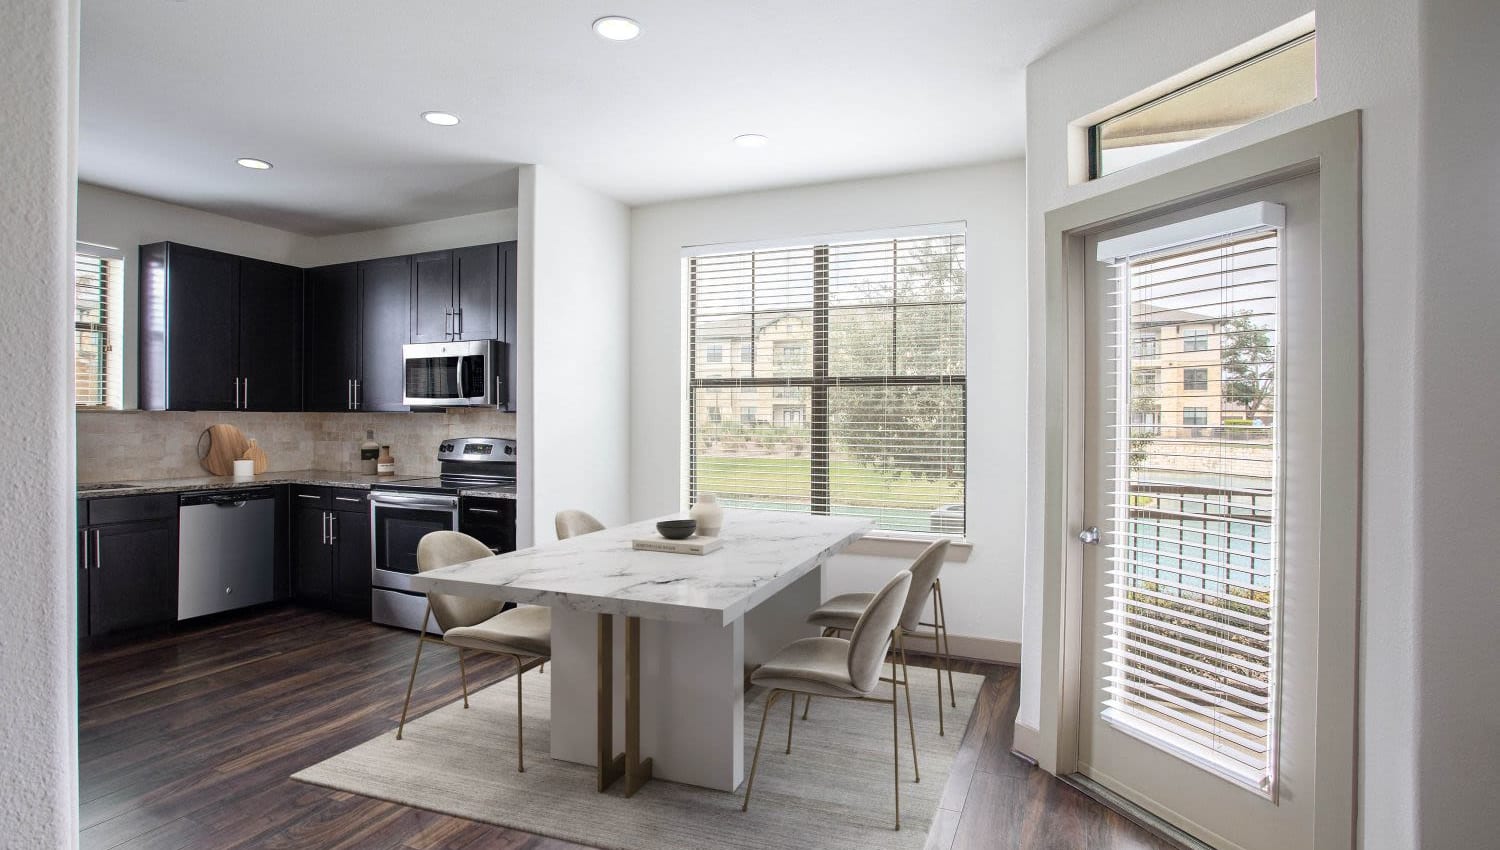 Model kitchen with dining nook and plenty of natural light at Olympus Falcon Landing in Katy, Texas